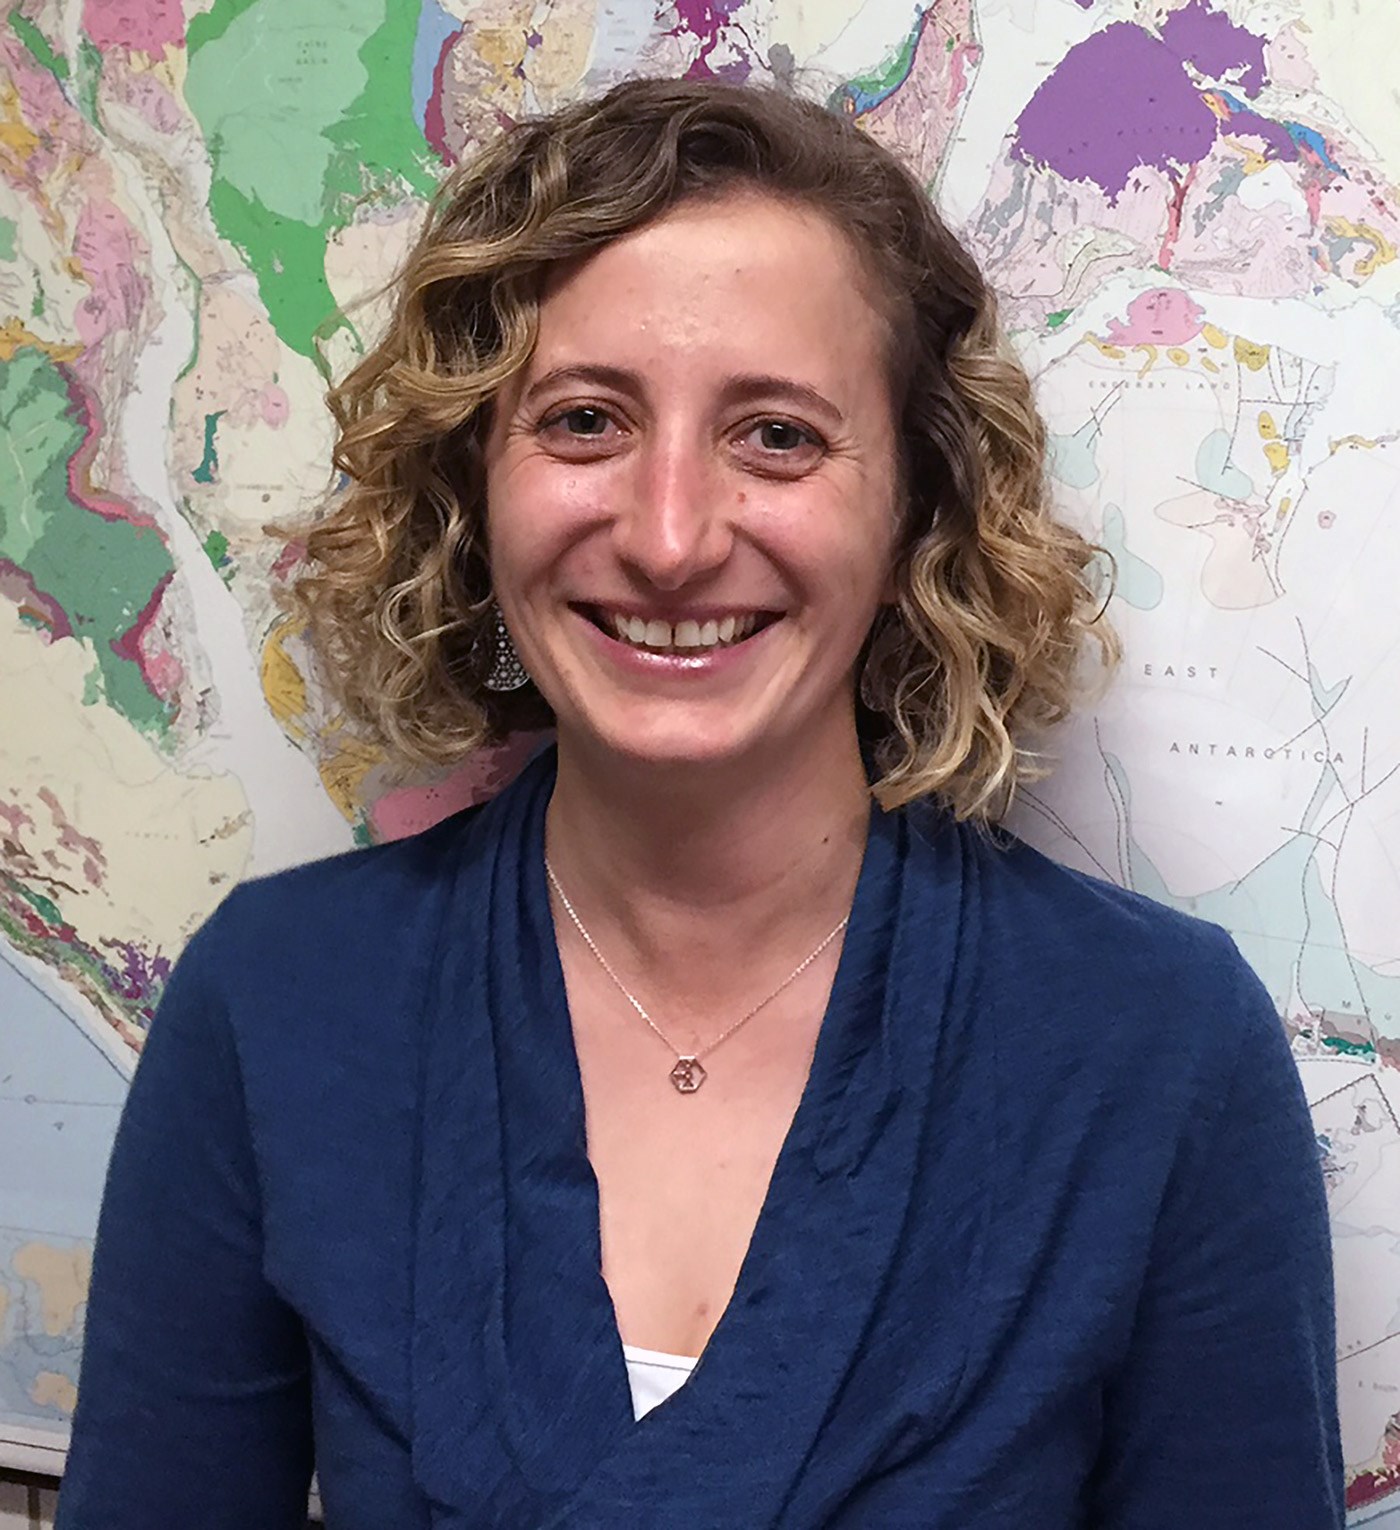 Kate Swanger  is an Associate Professor in the Environmental, Earth and Atmospheric Sciences Department at UMass Lowell.